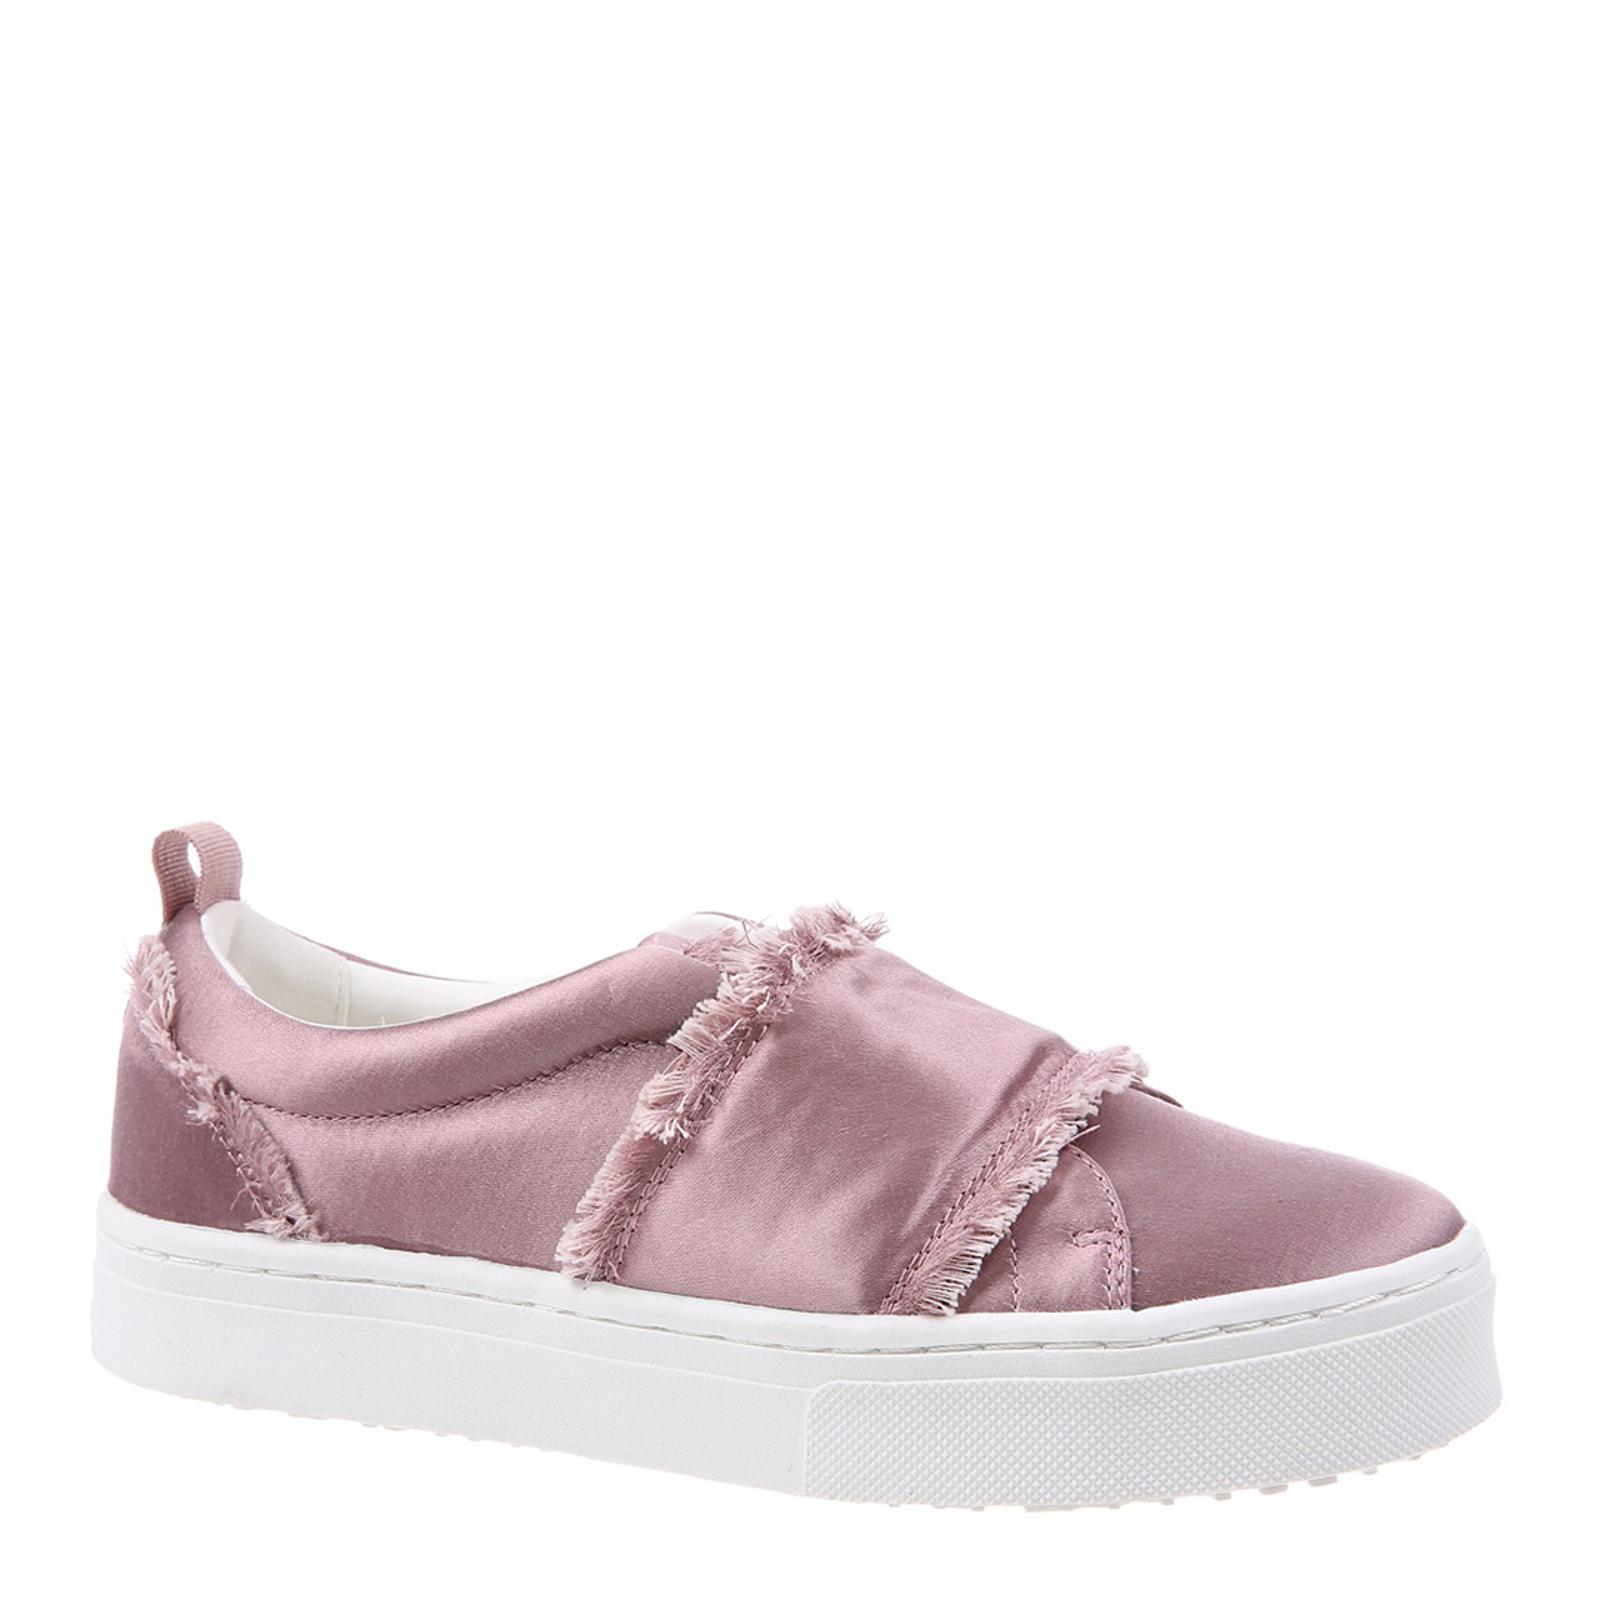 Pink Satin Levine 2 Fray Sneakers - BrandAlley